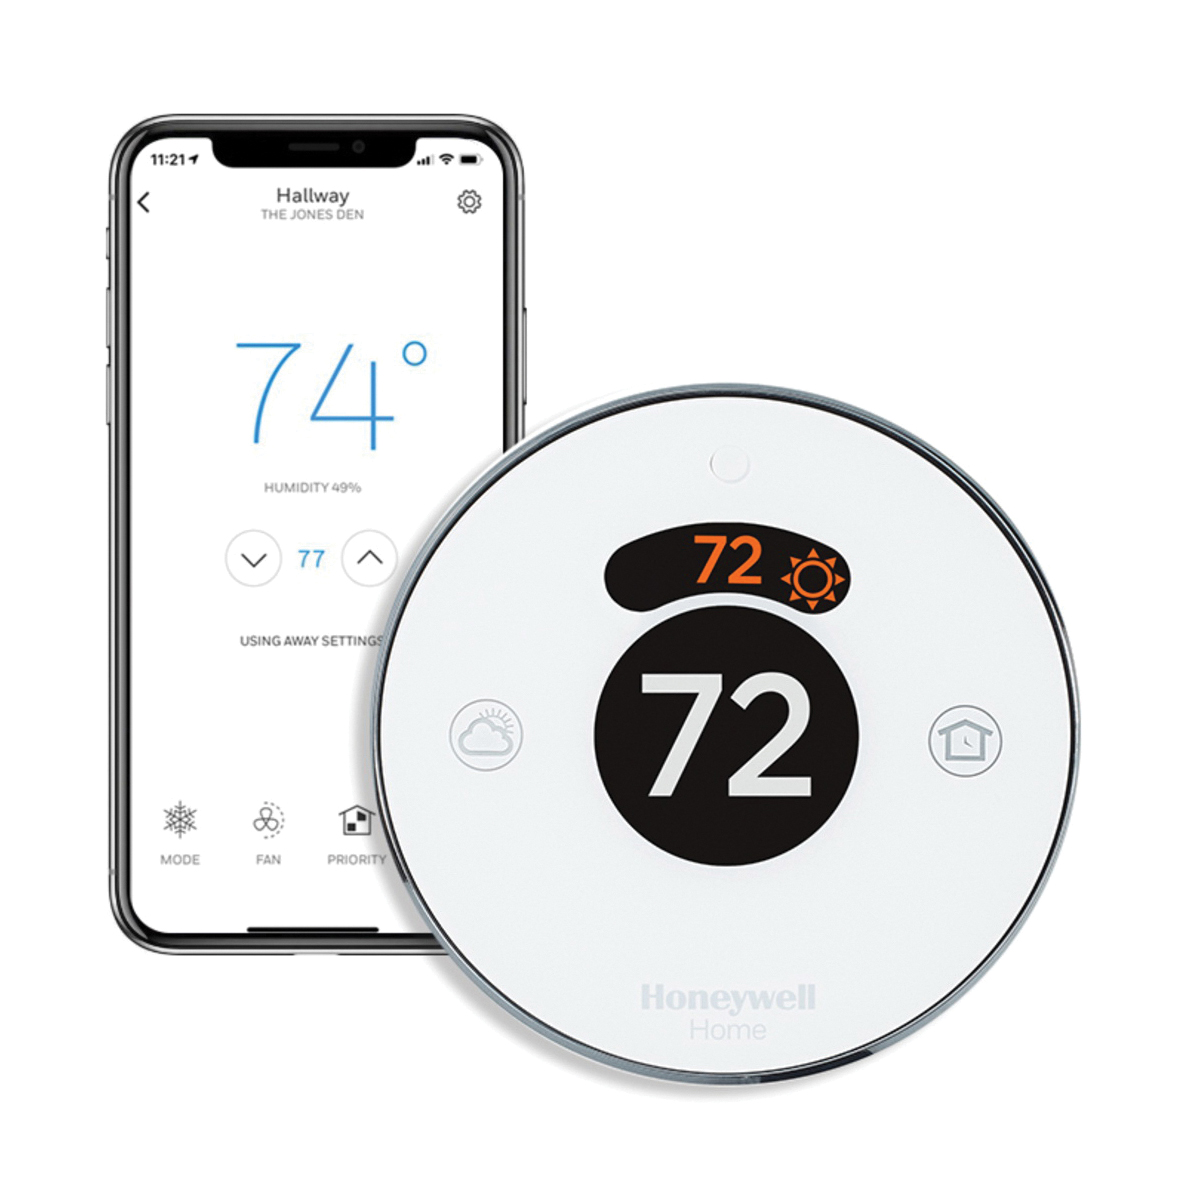 Honeywell Home The Round® TH8732WFH5002/U Smart Thermostat, 18 to 30 VAC, Round Display, Geofencing Programmability